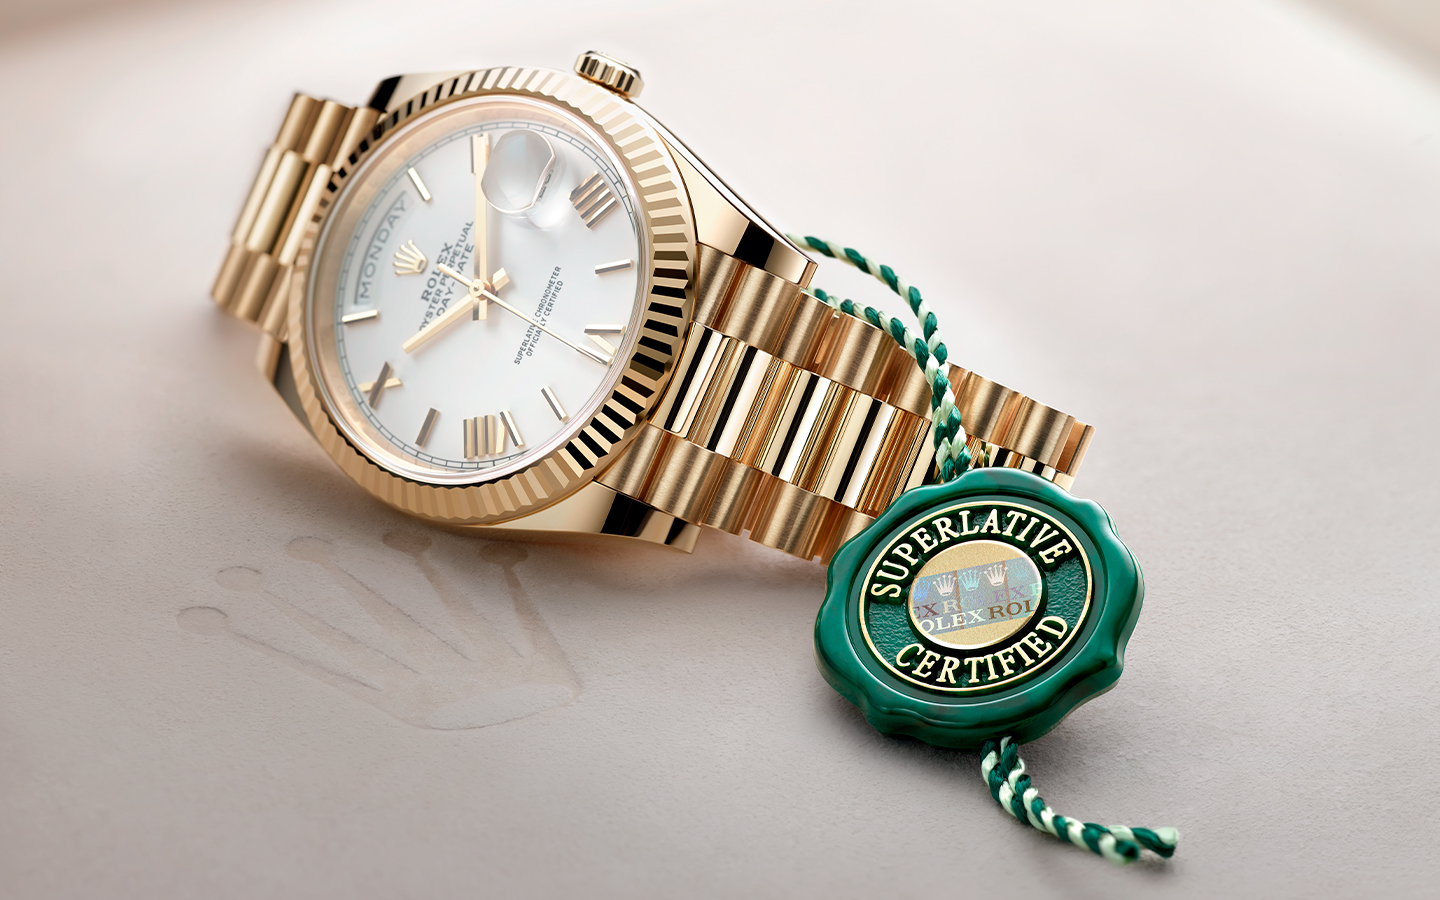 Rolex at Goldfinger - Caribbean watches